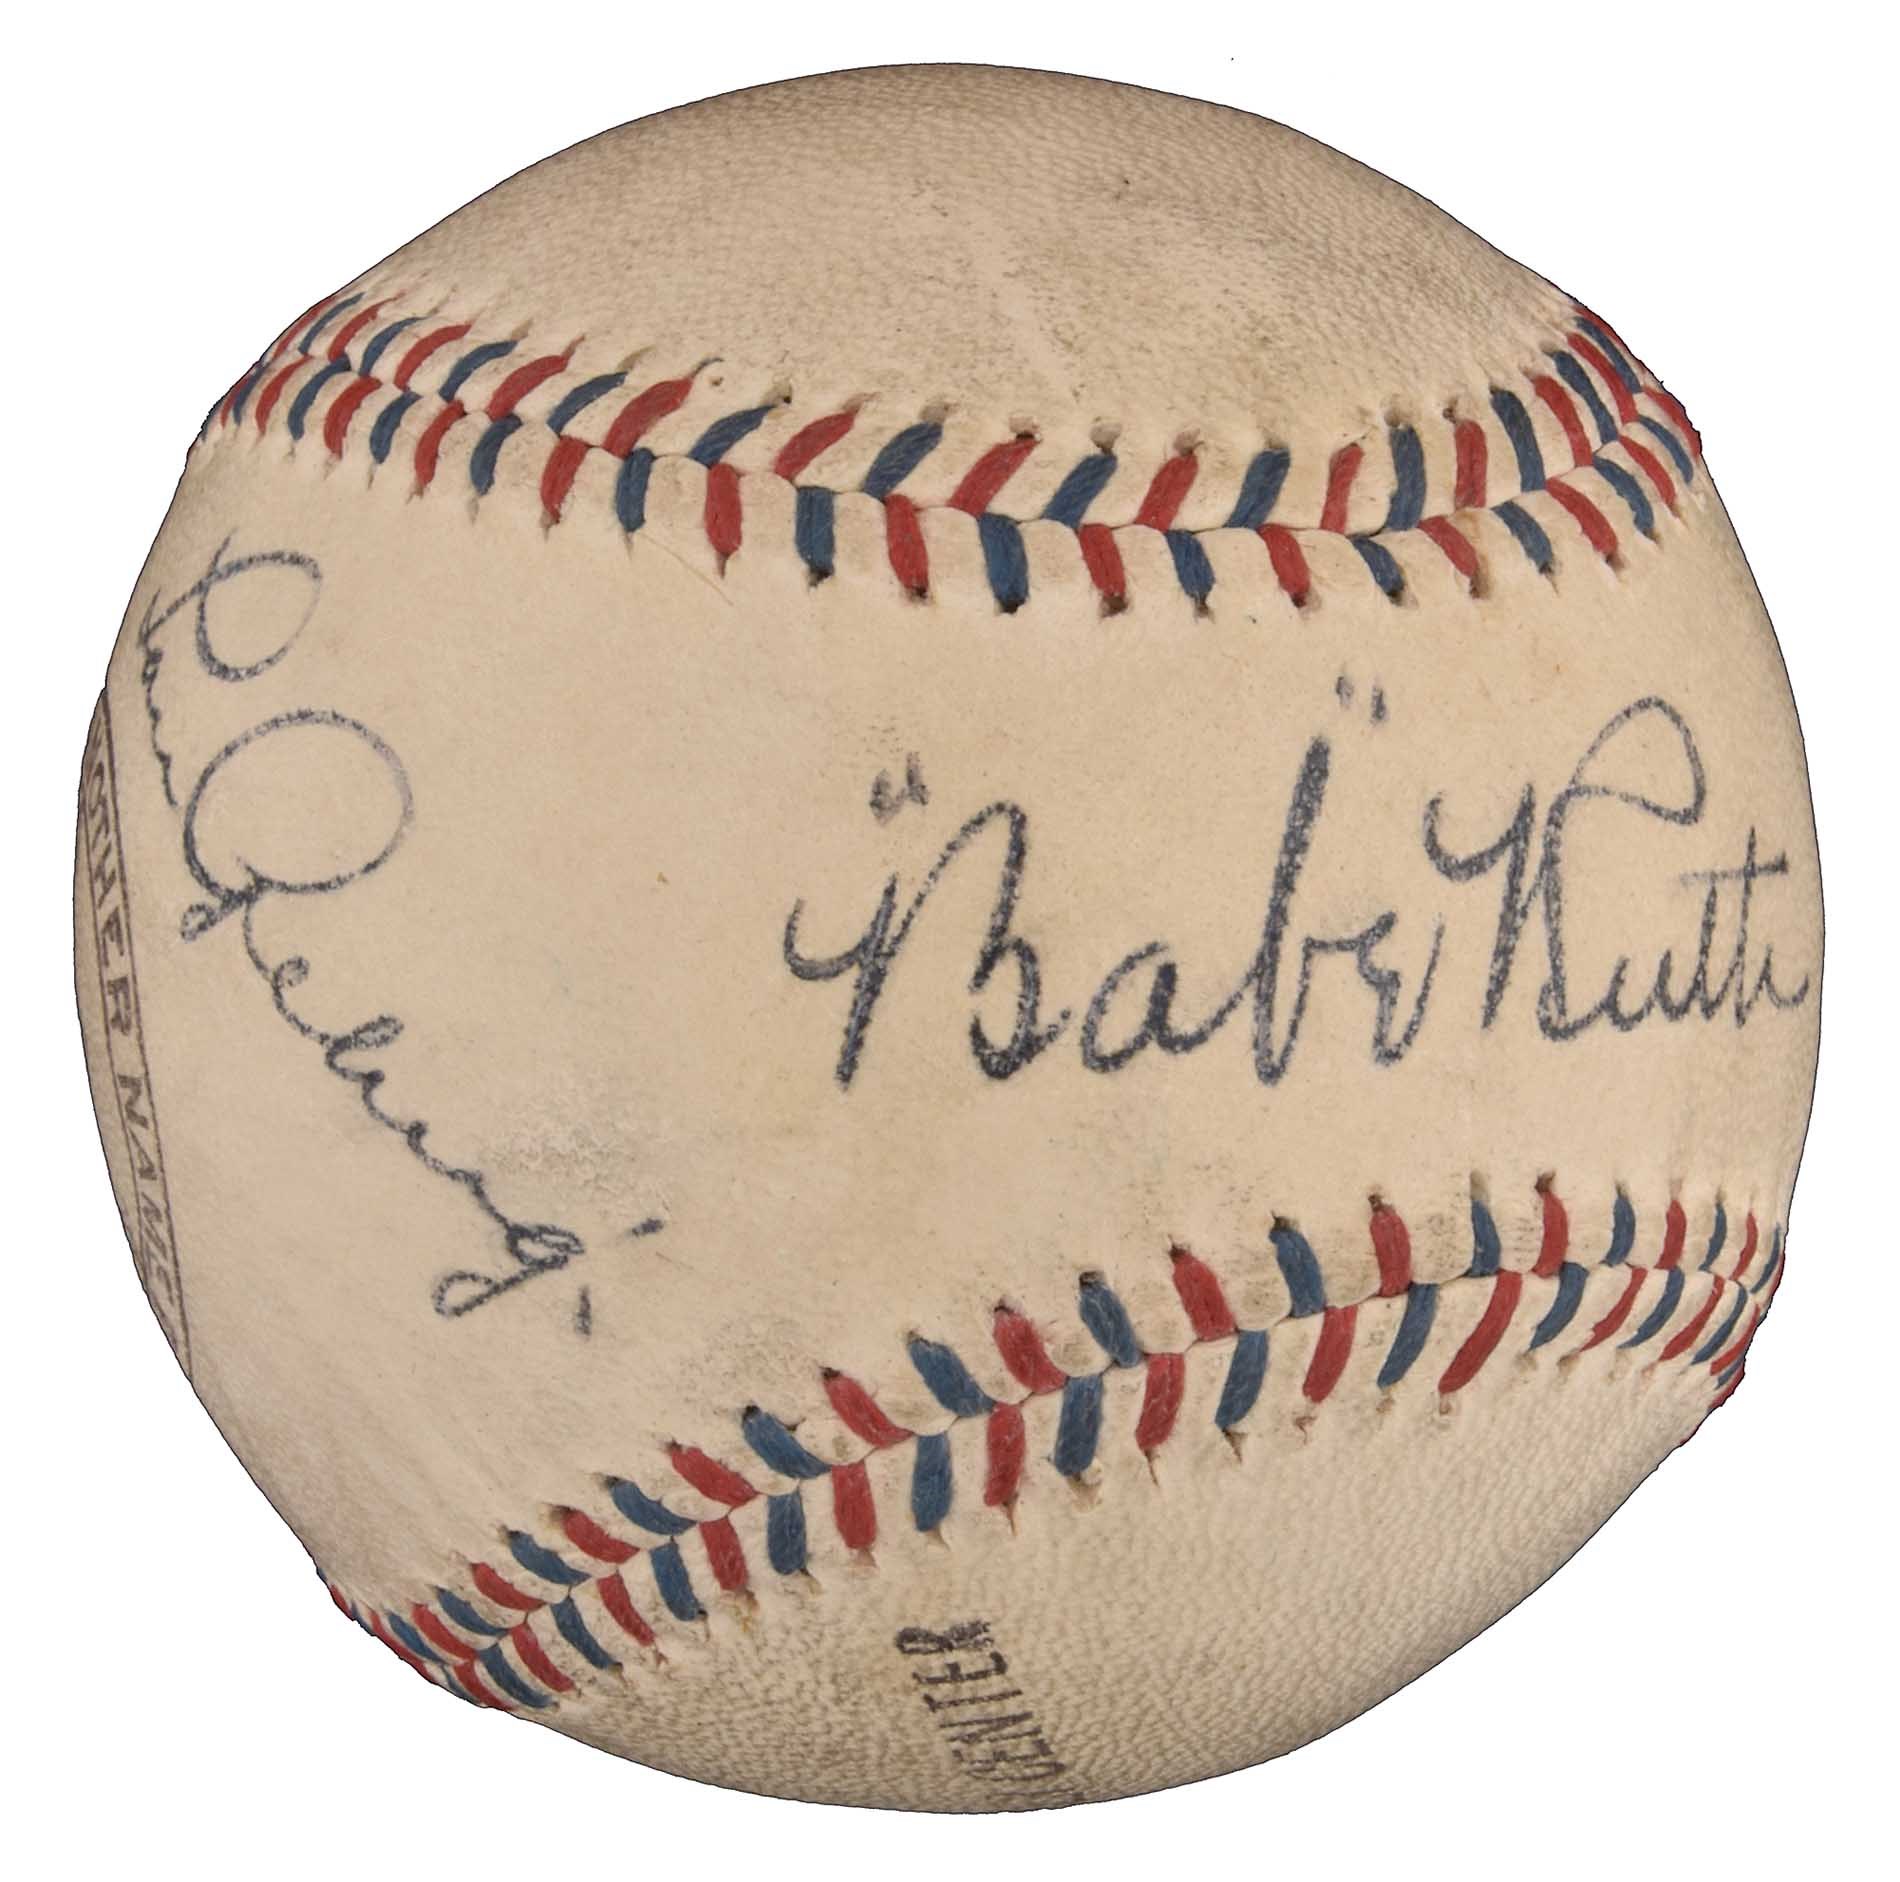 Sold at Auction: 1927 BABE RUTH SIGNED BASEBALL NEW YORK YANKEES